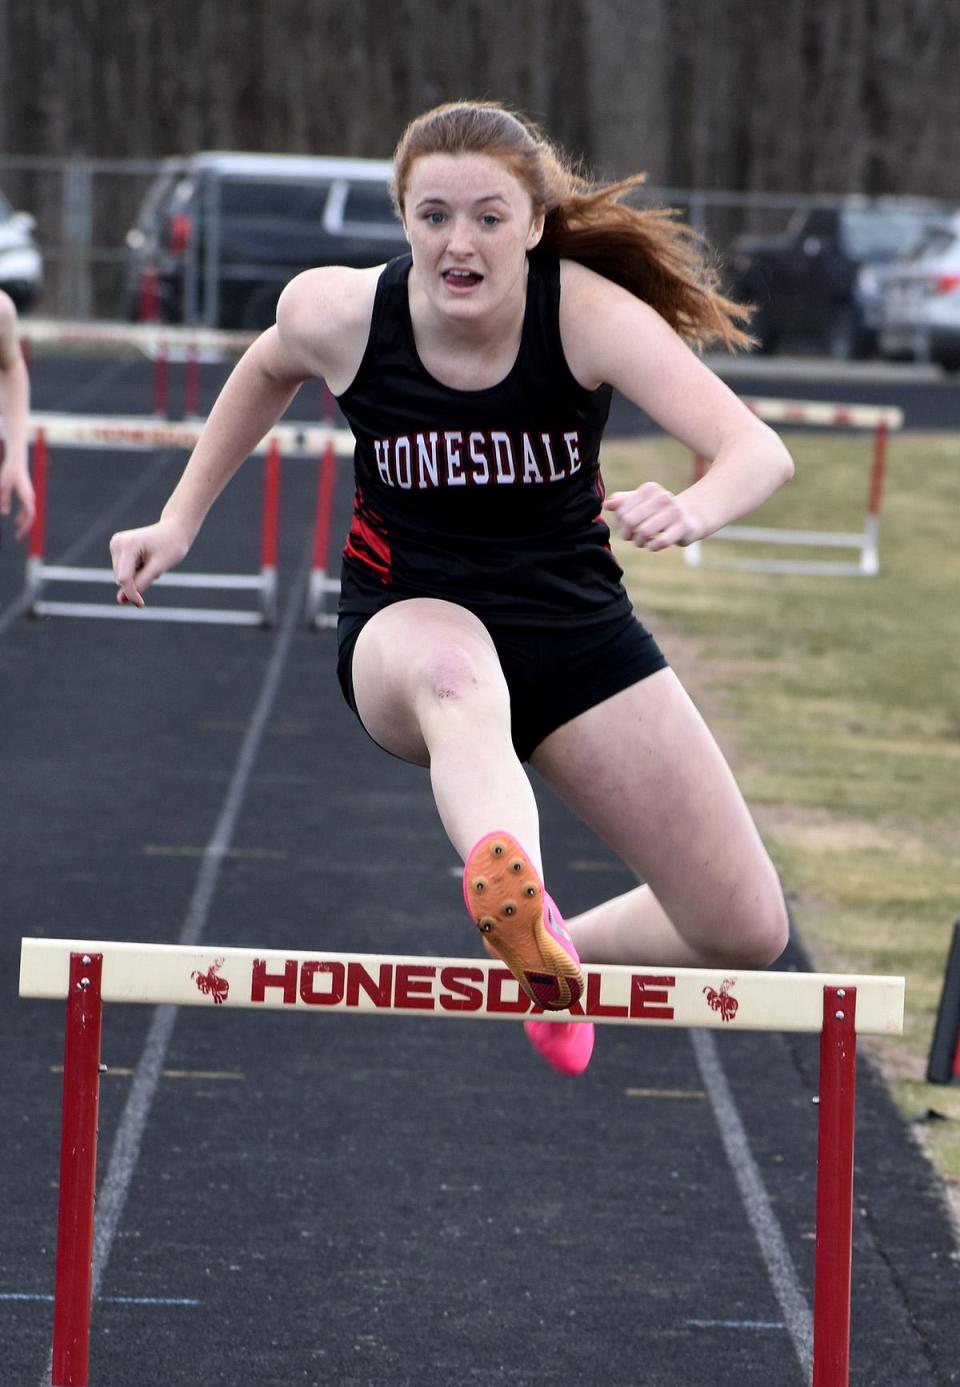 Honesdale's Ruby Martin sails over the final hurdle on her way to victory in the 300M event against Western Wayne.